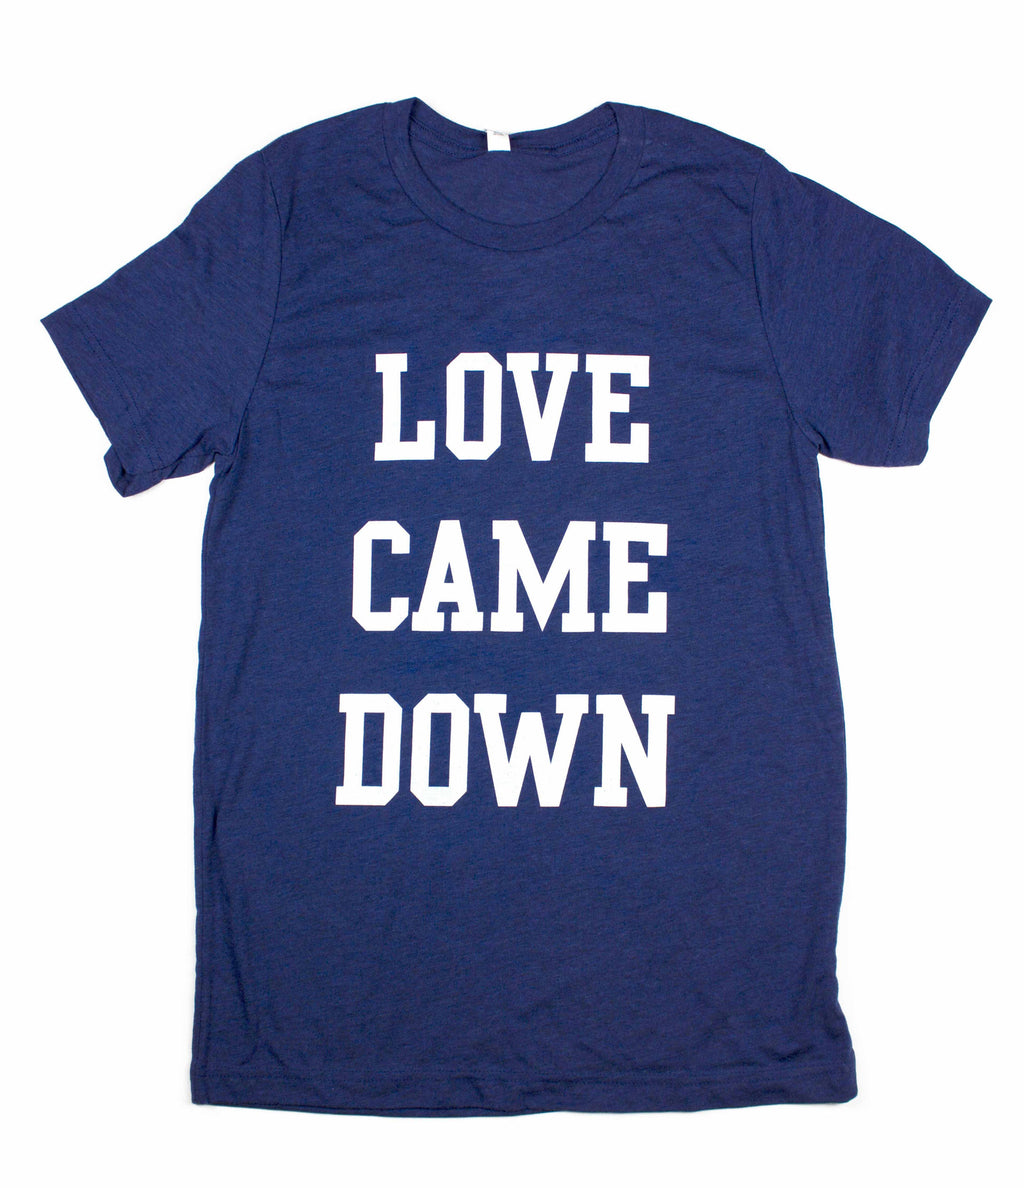 LOVE CAME DOWN NAVY T-SHIRT